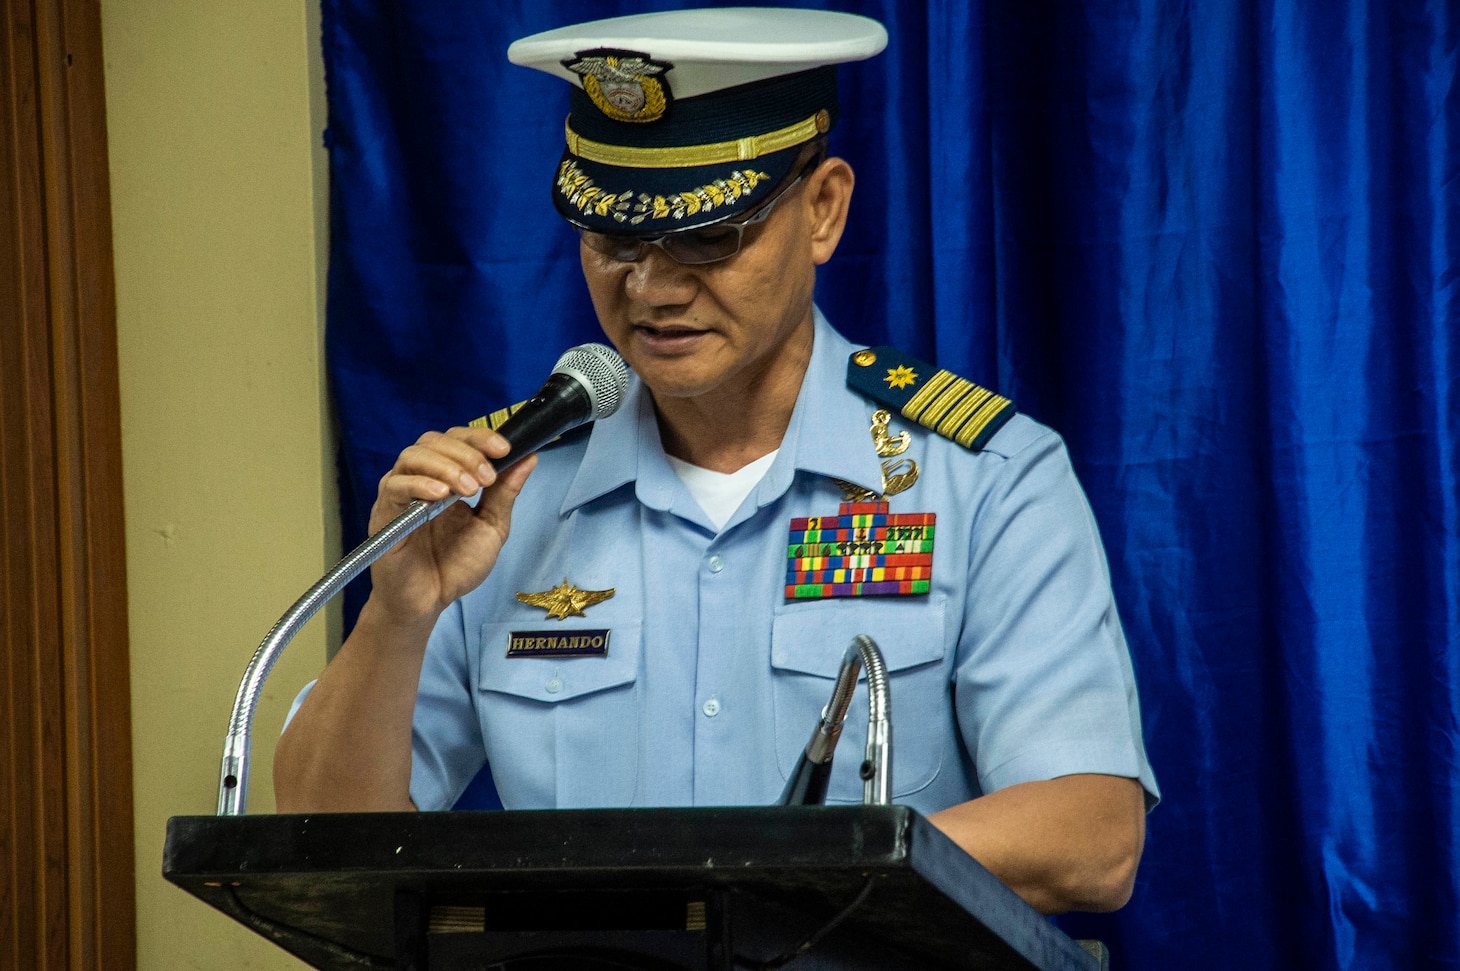 MANILA, Philippines (Aug. 19, 2019). Philippine Coast Guard Capt. Edgardo T. Hernando, commander, Coast Guard Special Operation Force, delivers keynote remarks during the visit, board, search and seizure workshop as part of Southeast Asia Cooperation and Training (SEACAT) 2019 at the Philippine Coast Guard Headquarters in Manila. This year marks the 18th iteration of SEACAT, which is designed to enhance maritime security skills by highlighting the value of information sharing and multilateral coordination.